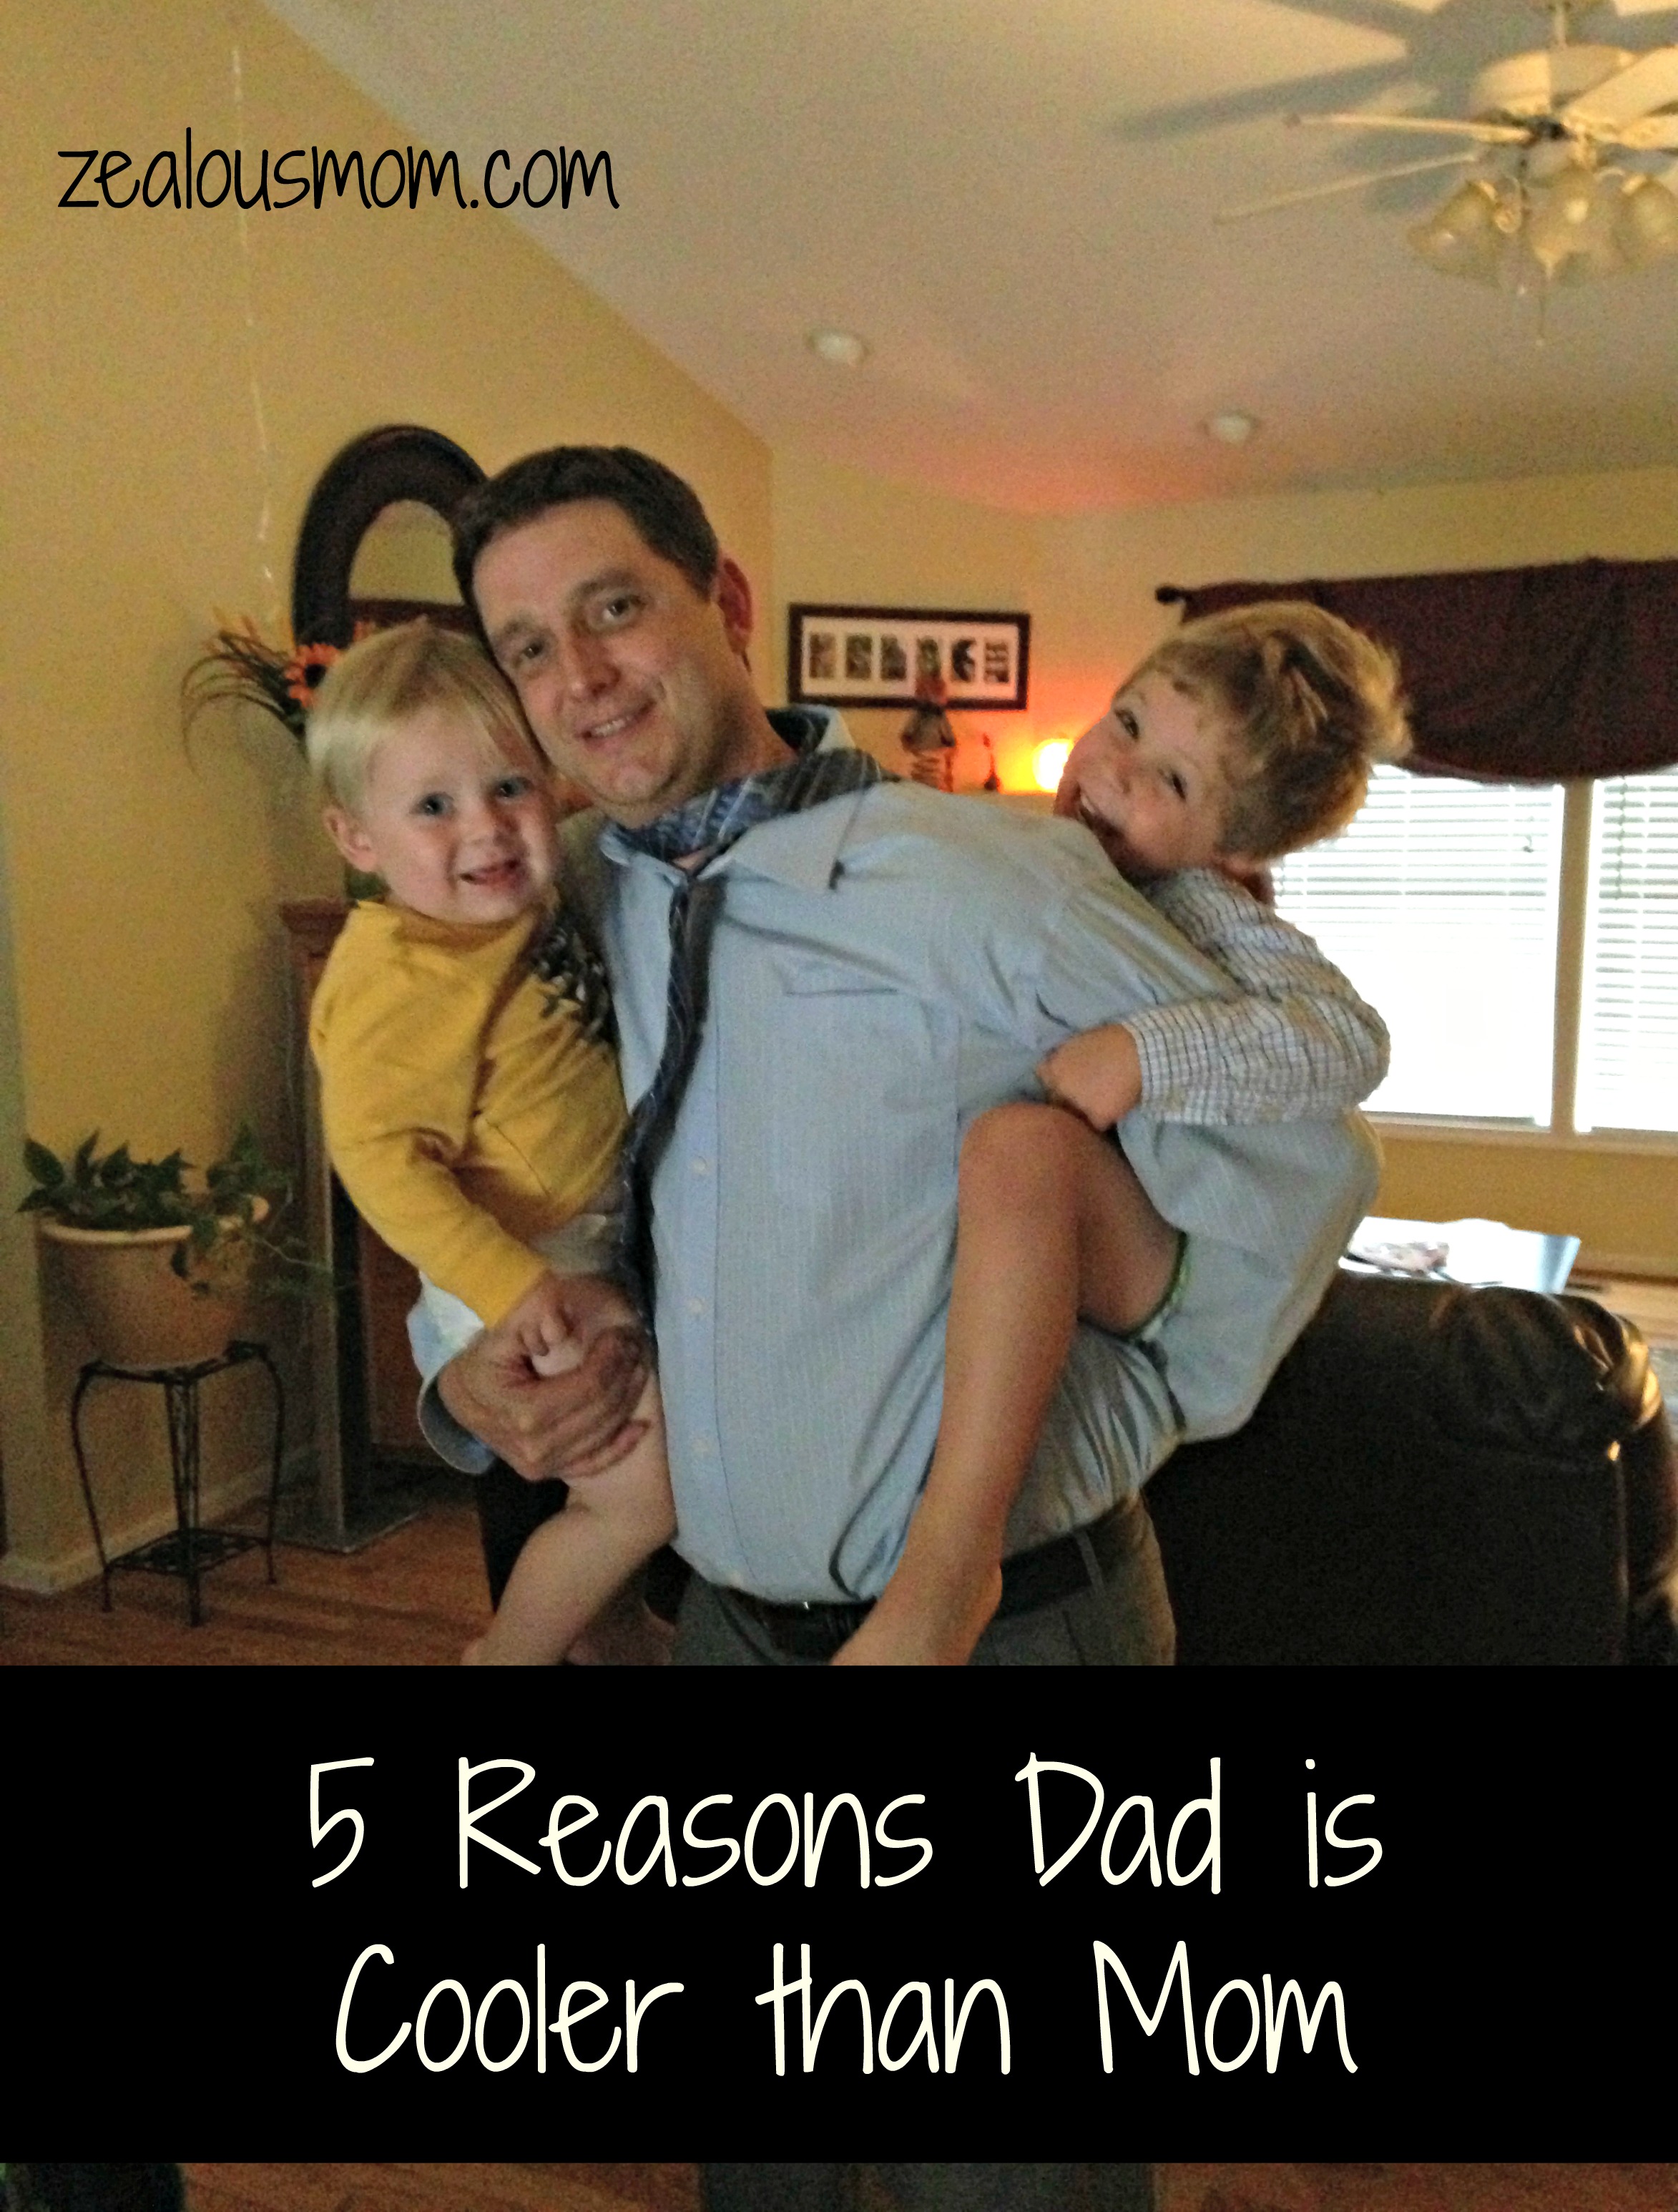 5 Reasons Dad is Cooler than Mom